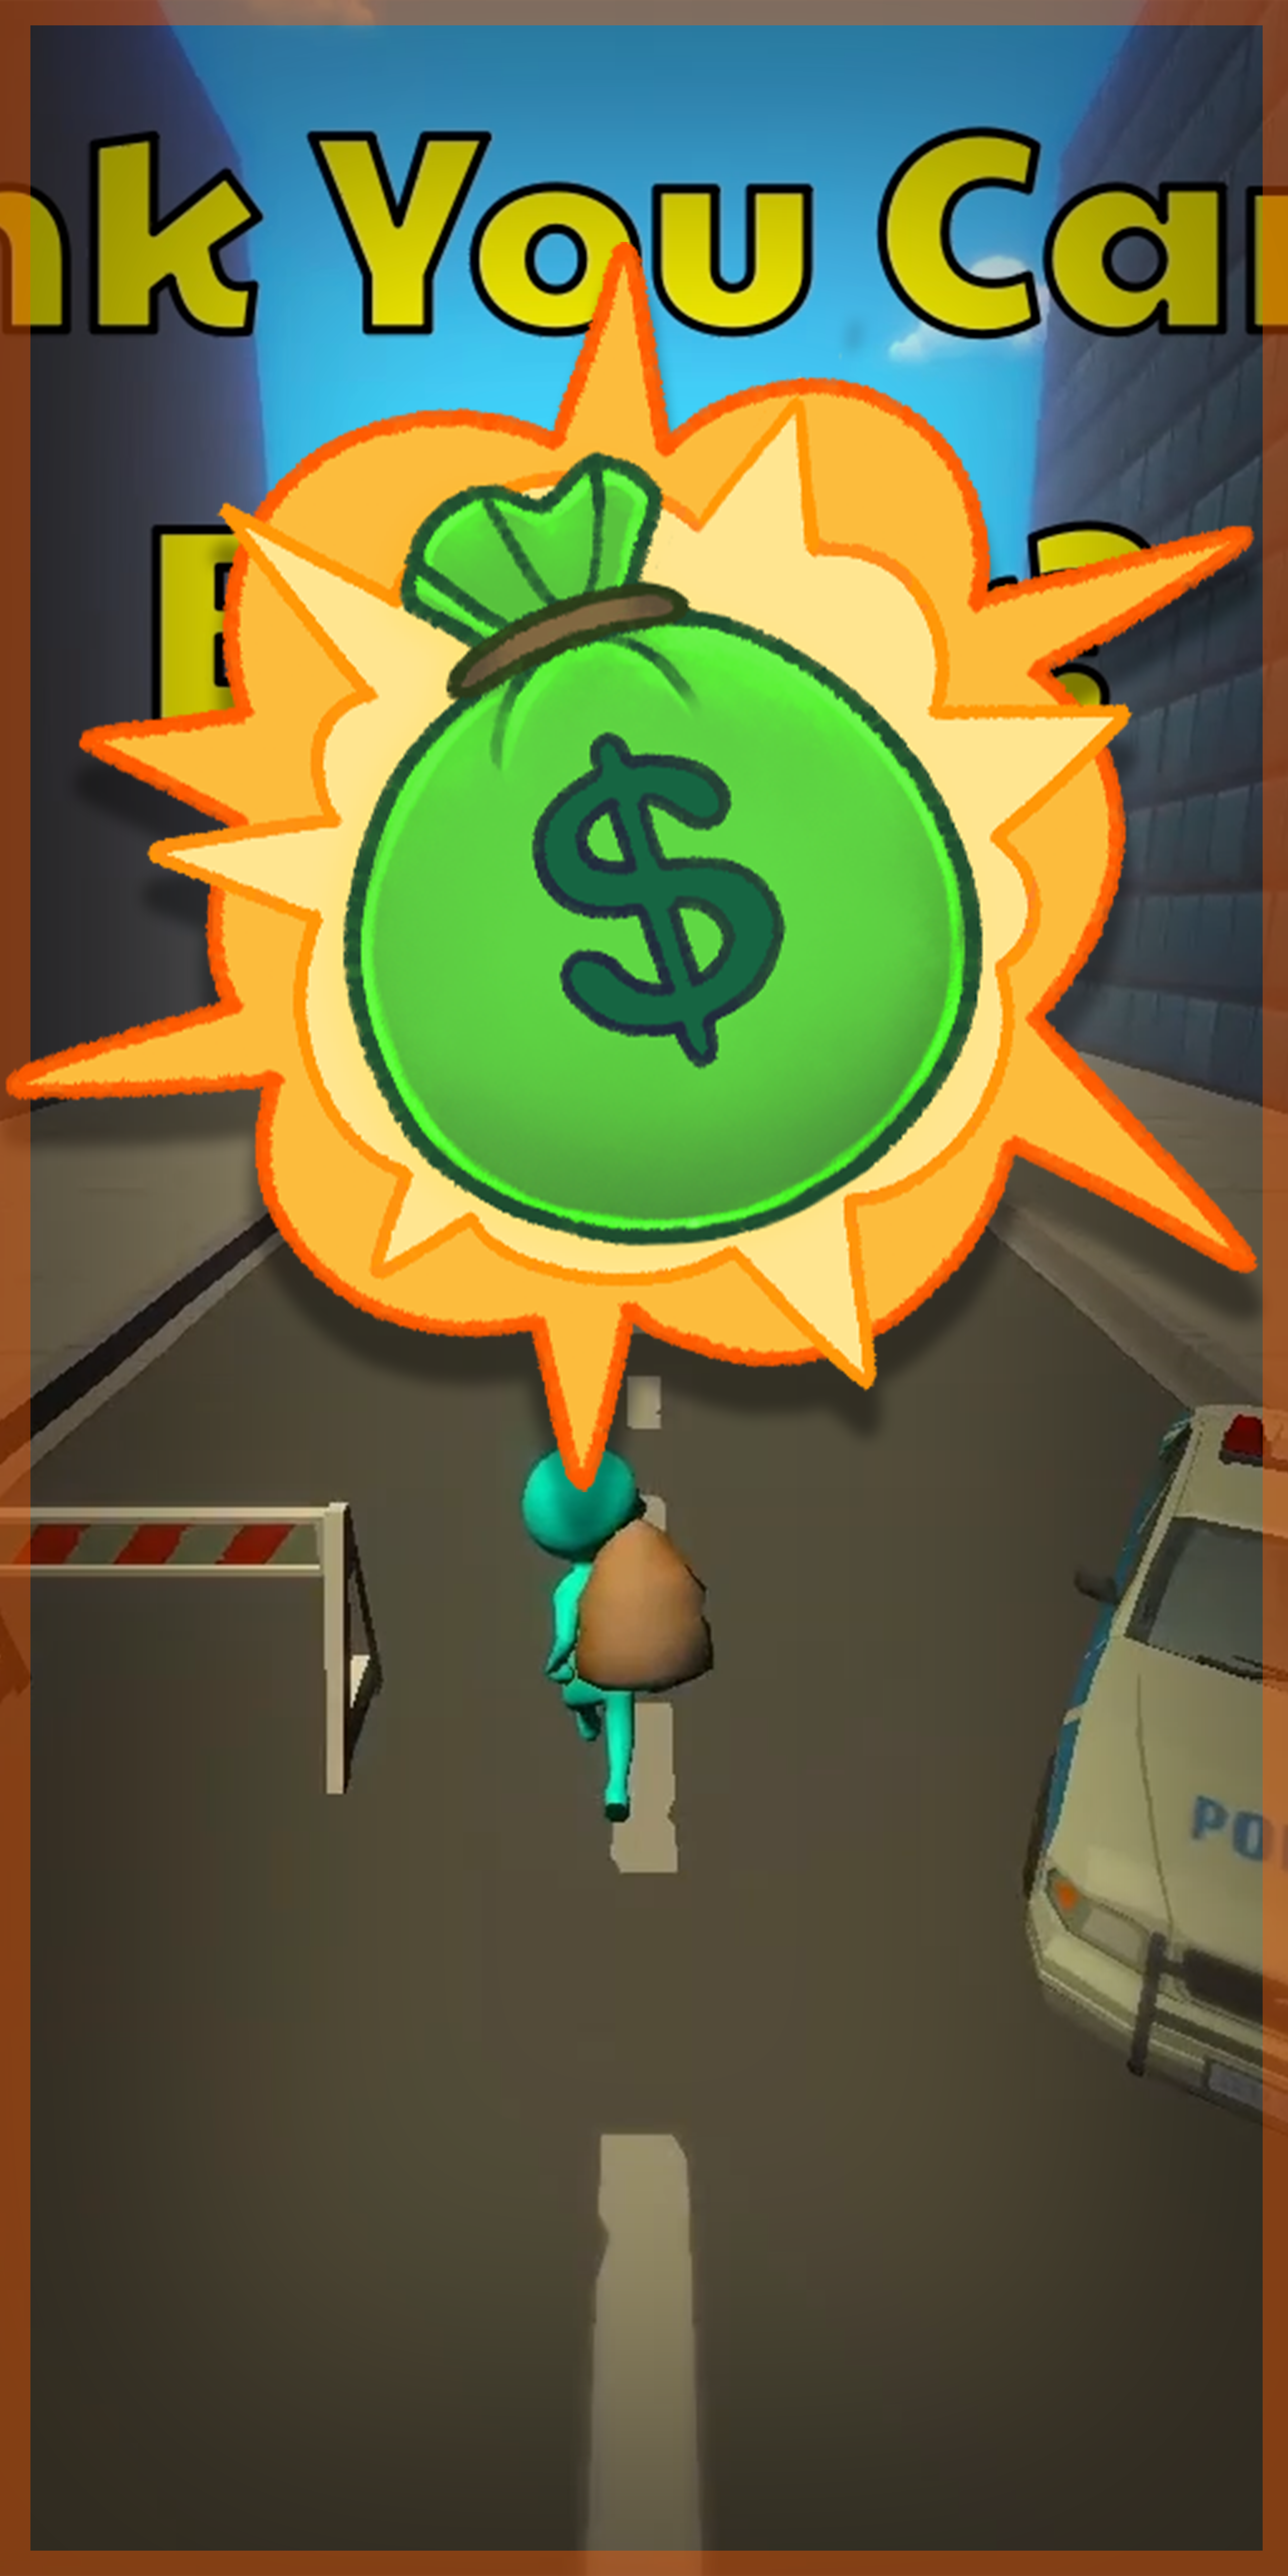 Bank Run marketing Image, a mobile game made by Mini Mammoth Games